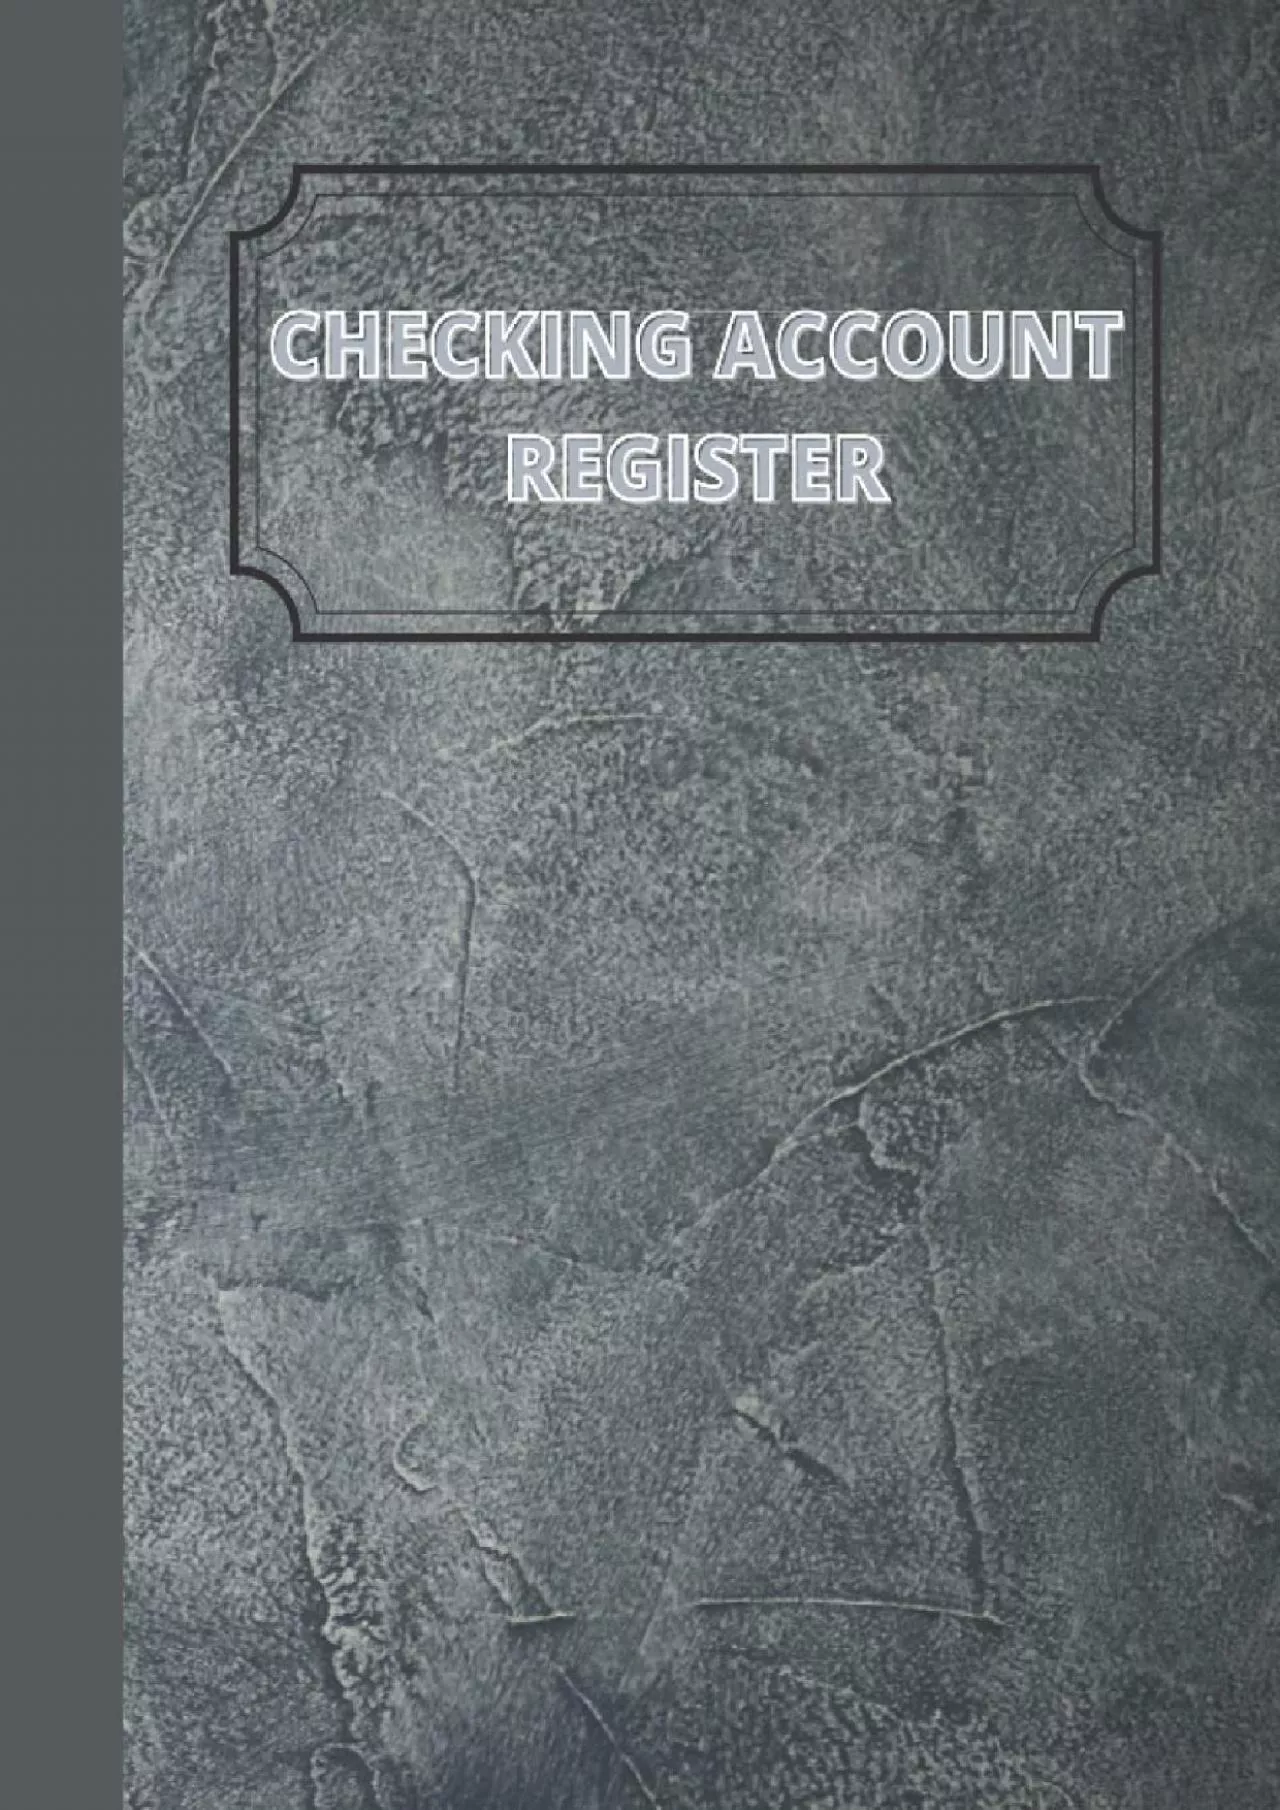 Checking Account Register: Check Register Notebook to Track Transactions credits and debits